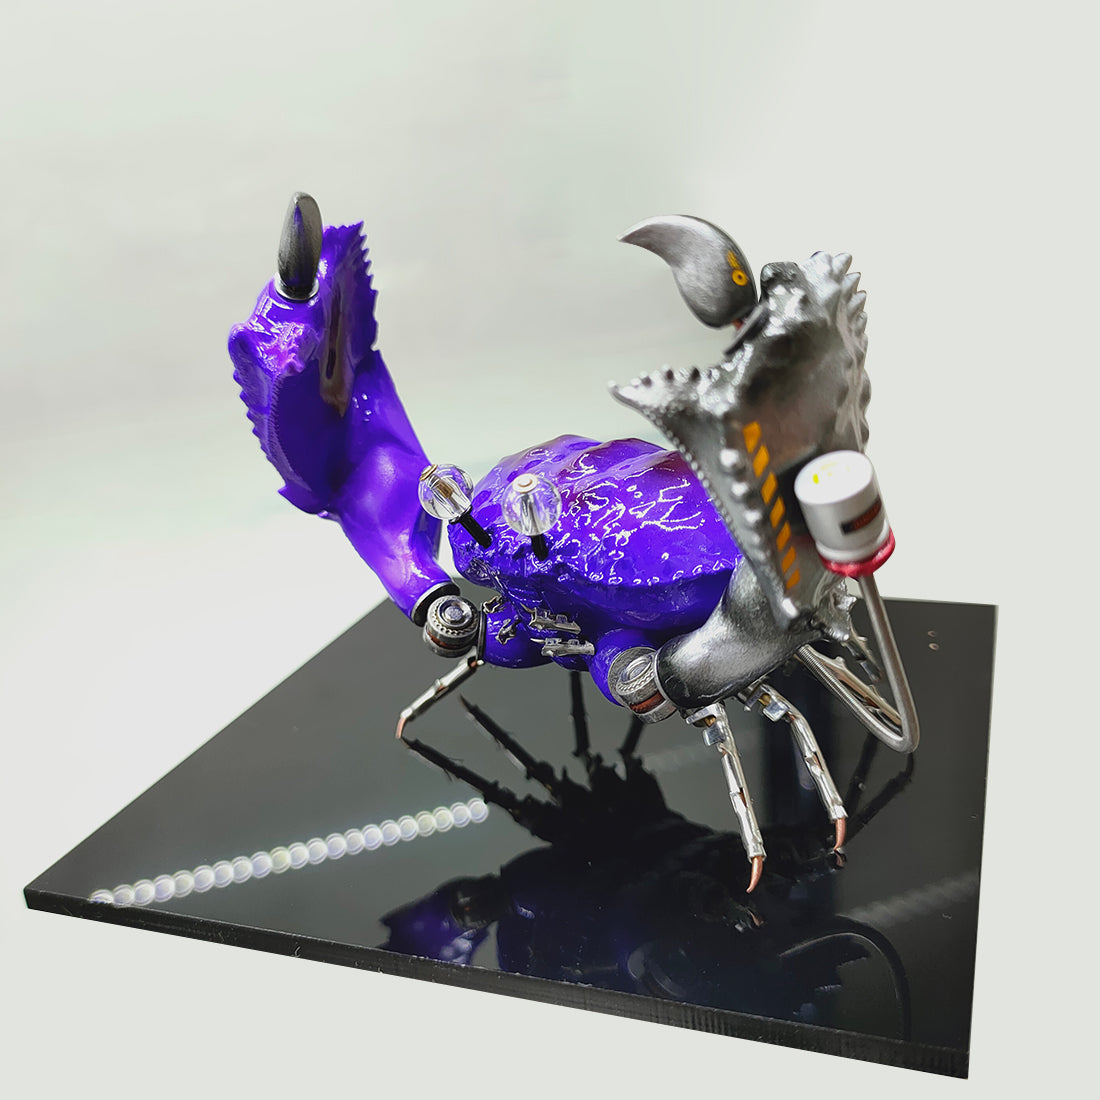 Punk Style 3D Purple Vampire Crab Model Crafts Collection- Finished Version